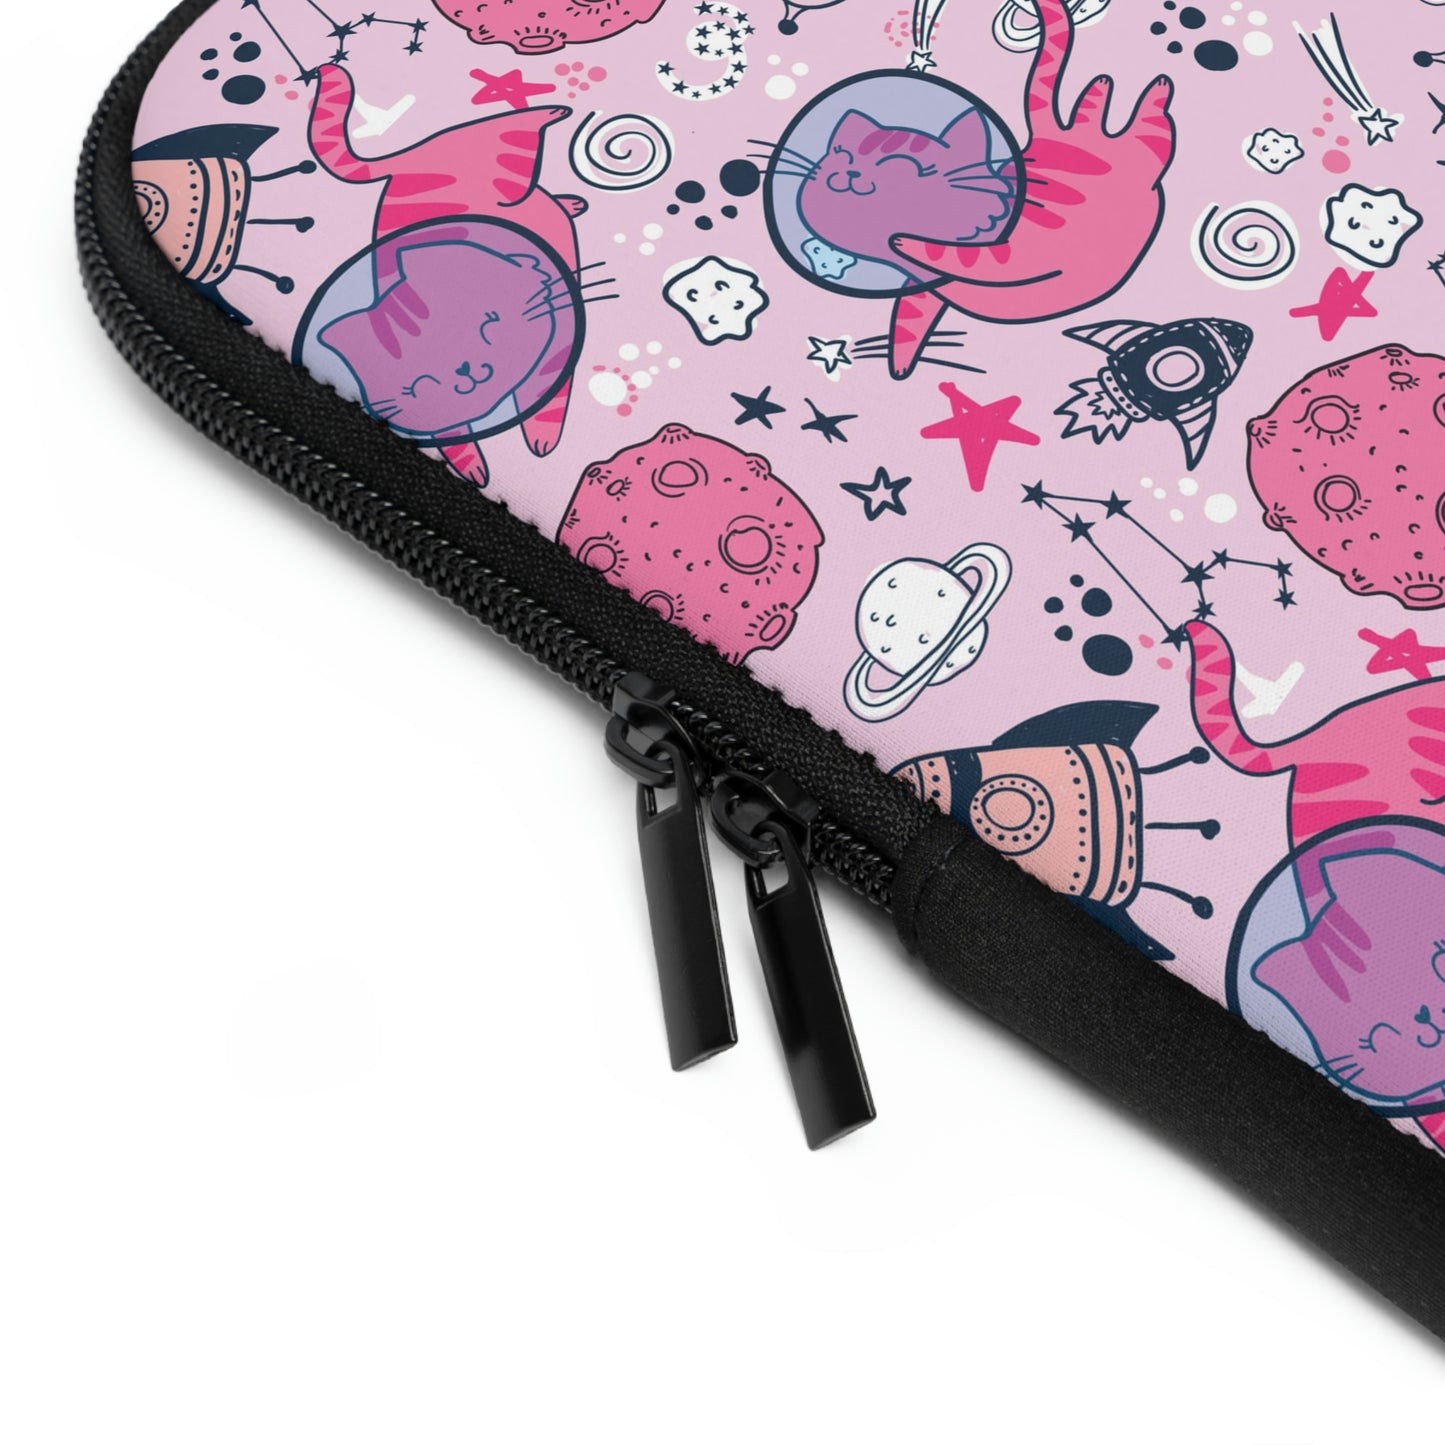 Space Cats Laptop Sleeve